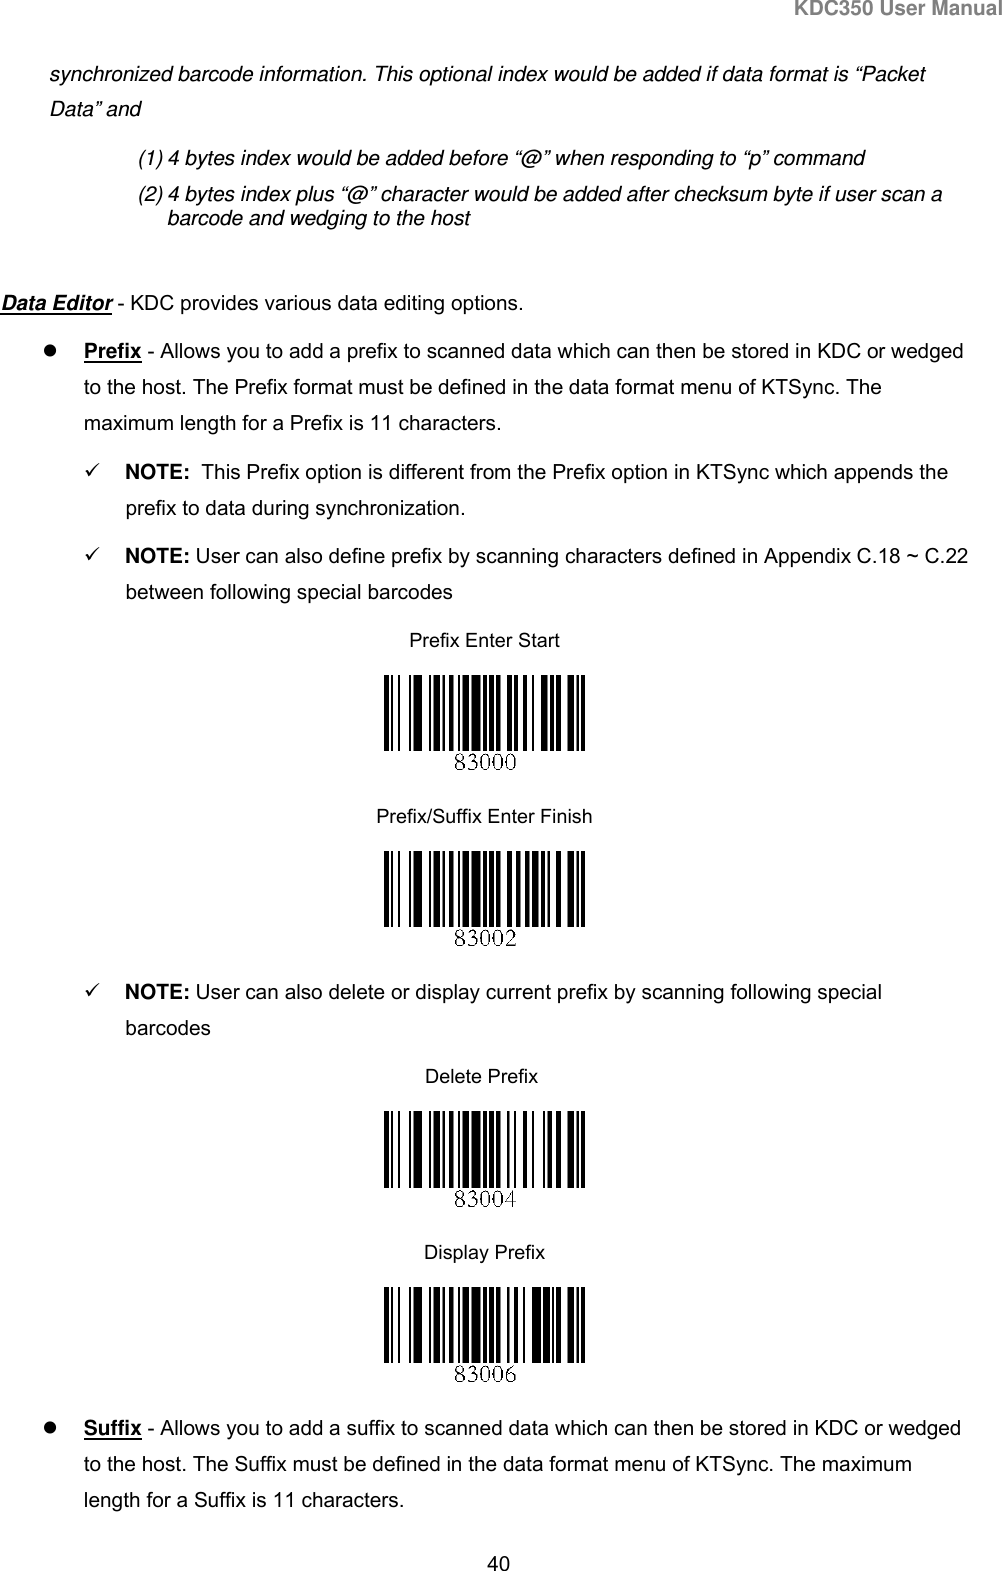 KDC350 User Manual  40  synchronized barcode information. This optional index would be added if data format is “Packet Data” and  (1) 4 bytes index would be added before “@” when responding to “p” command (2) 4 bytes index plus “@” character would be added after checksum byte if user scan a barcode and wedging to the host  Data Editor - KDC provides various data editing options.  Prefix - Allows you to add a prefix to scanned data which can then be stored in KDC or wedged to the host. The Prefix format must be defined in the data format menu of KTSync. The maximum length for a Prefix is 11 characters.  NOTE:  This Prefix option is different from the Prefix option in KTSync which appends the prefix to data during synchronization.    NOTE: User can also define prefix by scanning characters defined in Appendix C.18 ~ C.22 between following special barcodes Prefix Enter Start  Prefix/Suffix Enter Finish                                                                               NOTE: User can also delete or display current prefix by scanning following special barcodes     Delete Prefix  Display Prefix                                                                                              Suffix - Allows you to add a suffix to scanned data which can then be stored in KDC or wedged to the host. The Suffix must be defined in the data format menu of KTSync. The maximum length for a Suffix is 11 characters.  